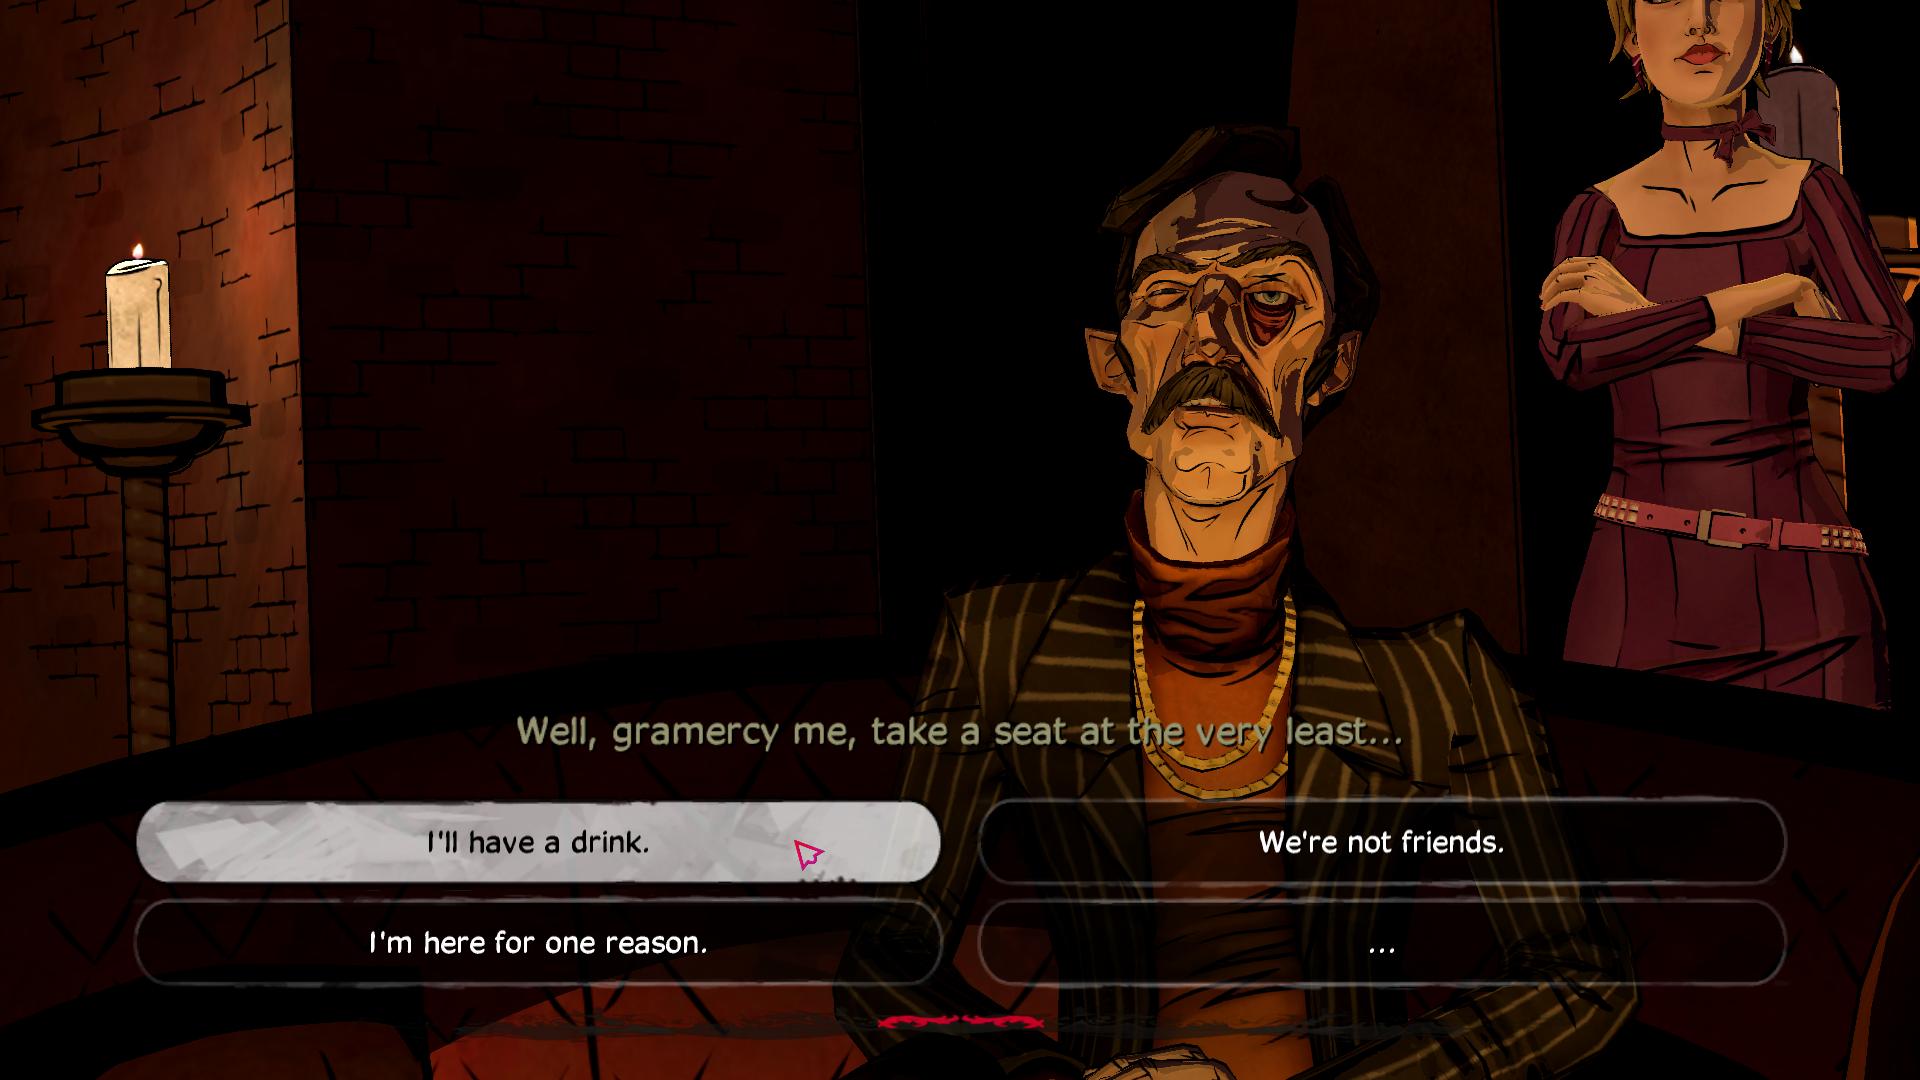 The Wolf Among Us: Episode 5 – Cry Wolf